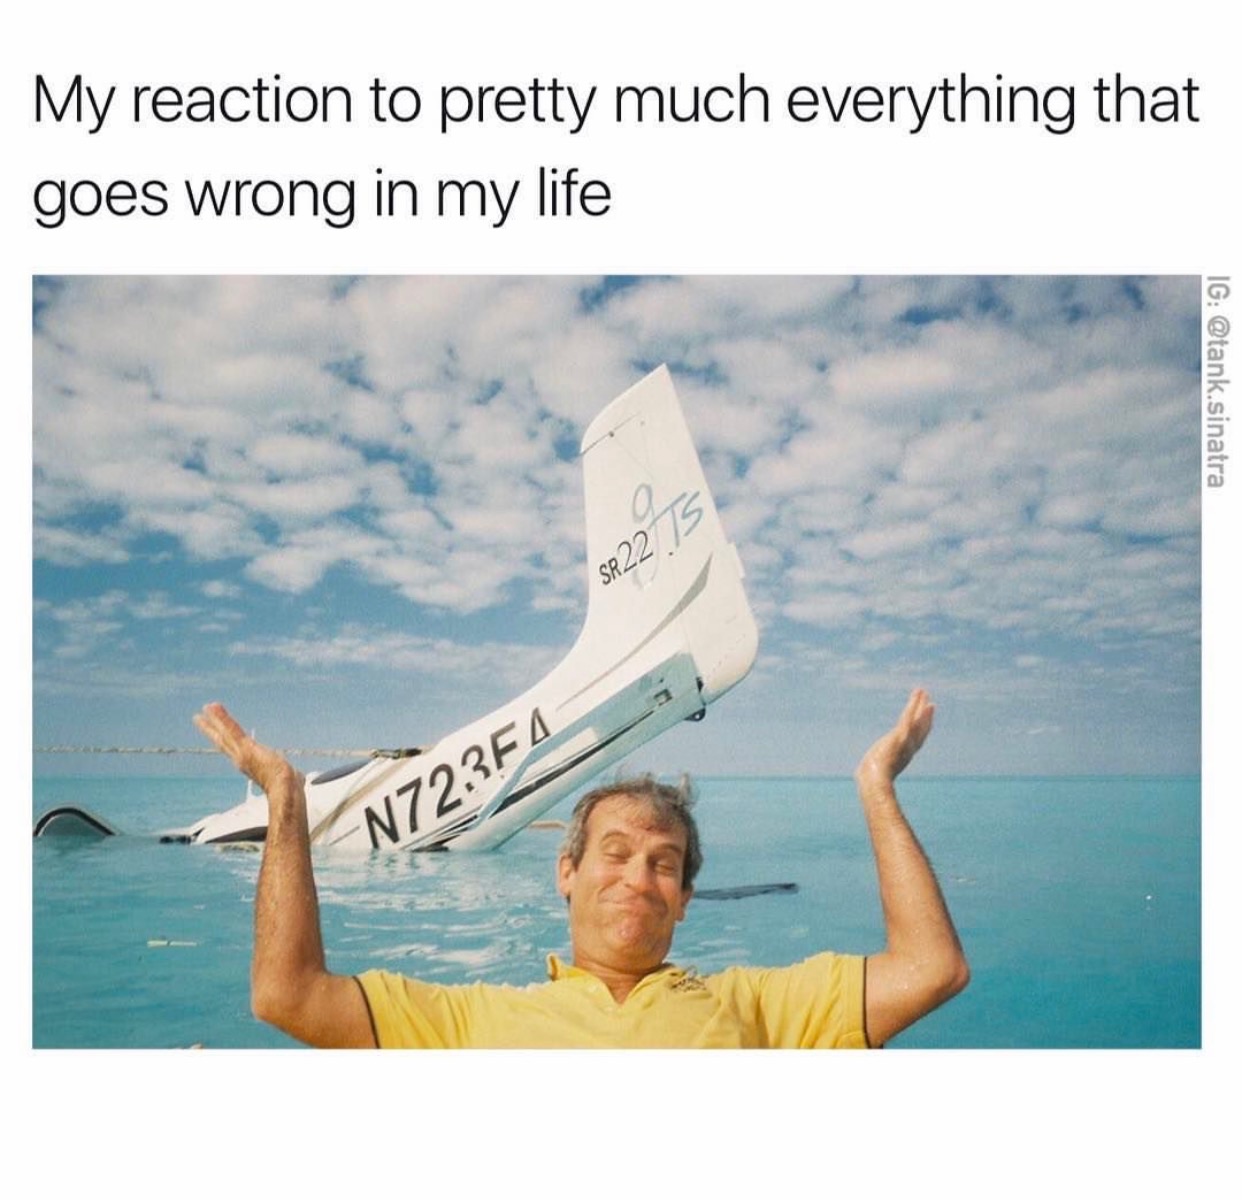 funniest 2018 best memes - My reaction to pretty much everything that goes wrong in my life Ig .sinatra SR22TS N72354